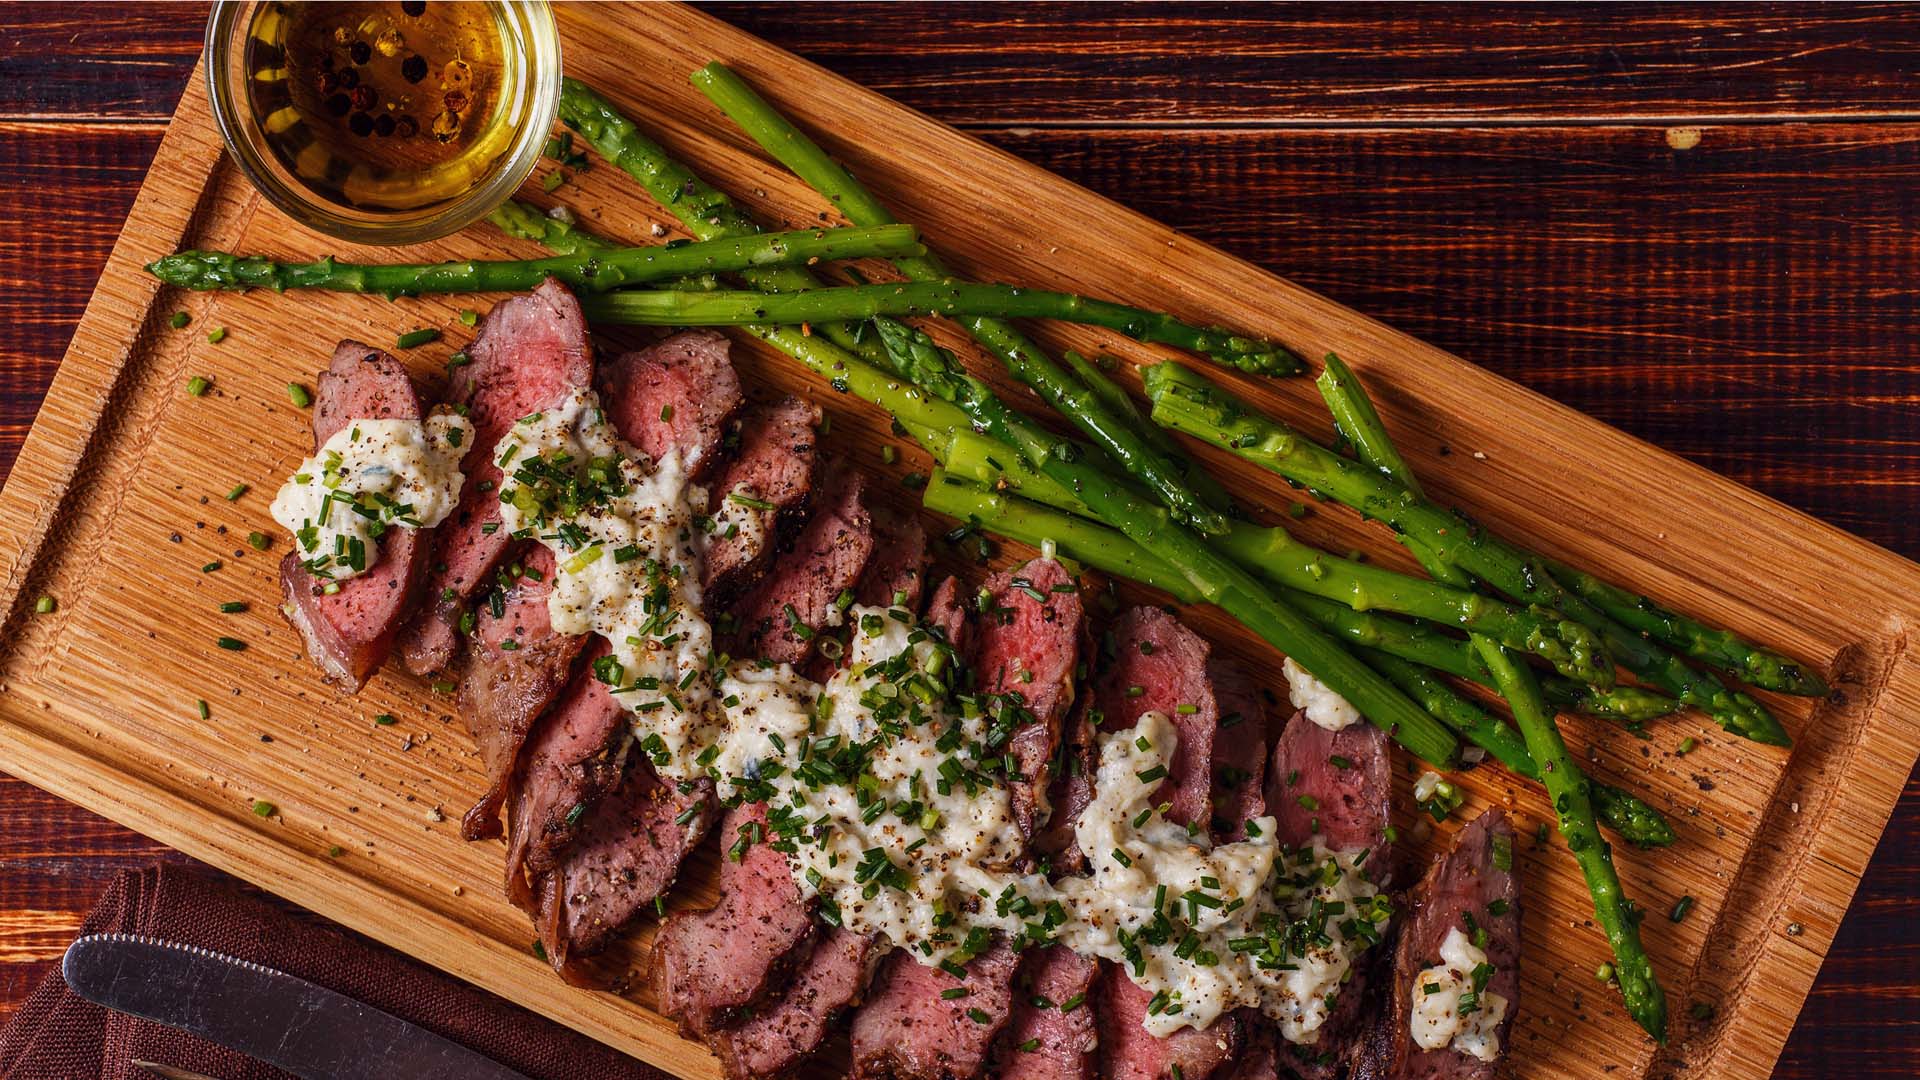 Rare steak laid out on a board with asparagus